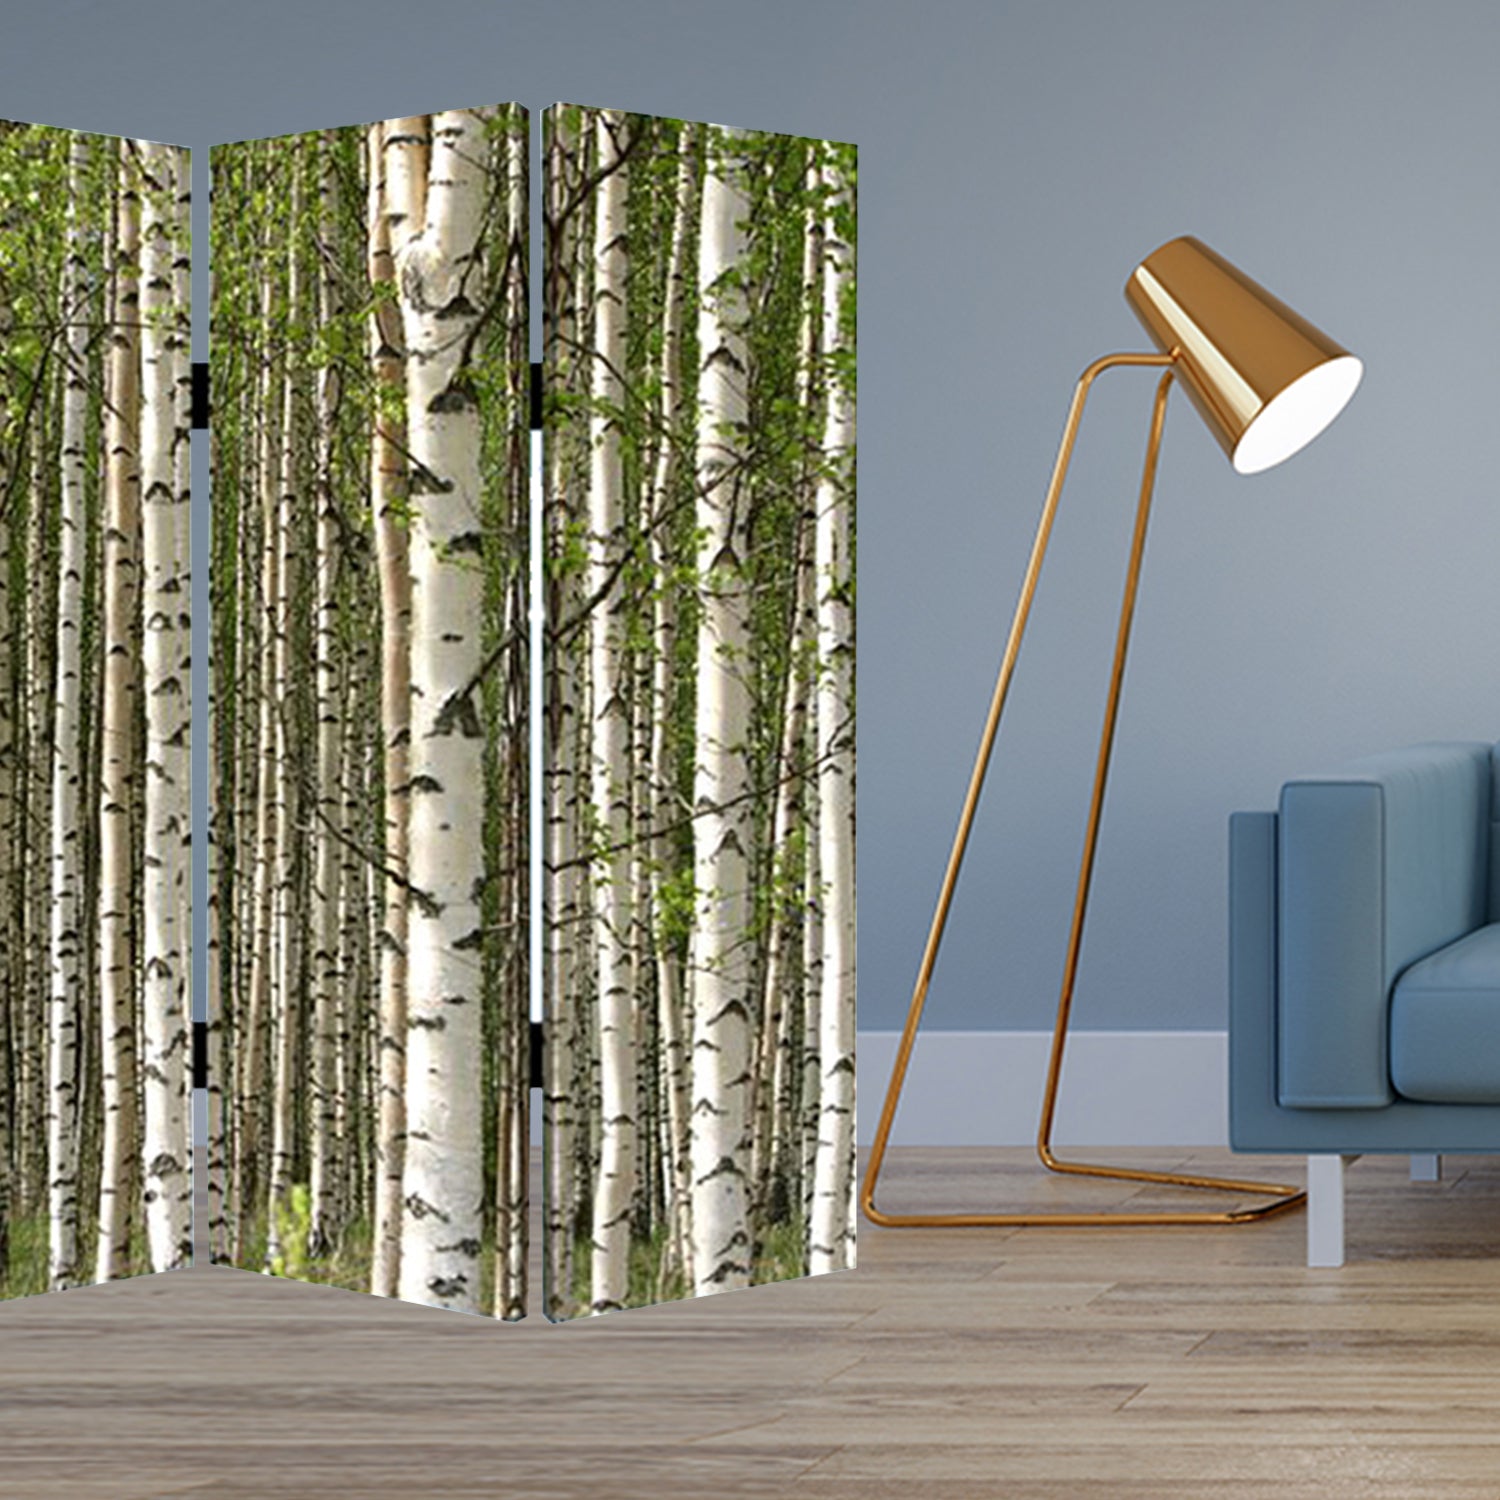 1" X 84" X 84" Multi Color Wood Canvas Prolific Forrest Screen